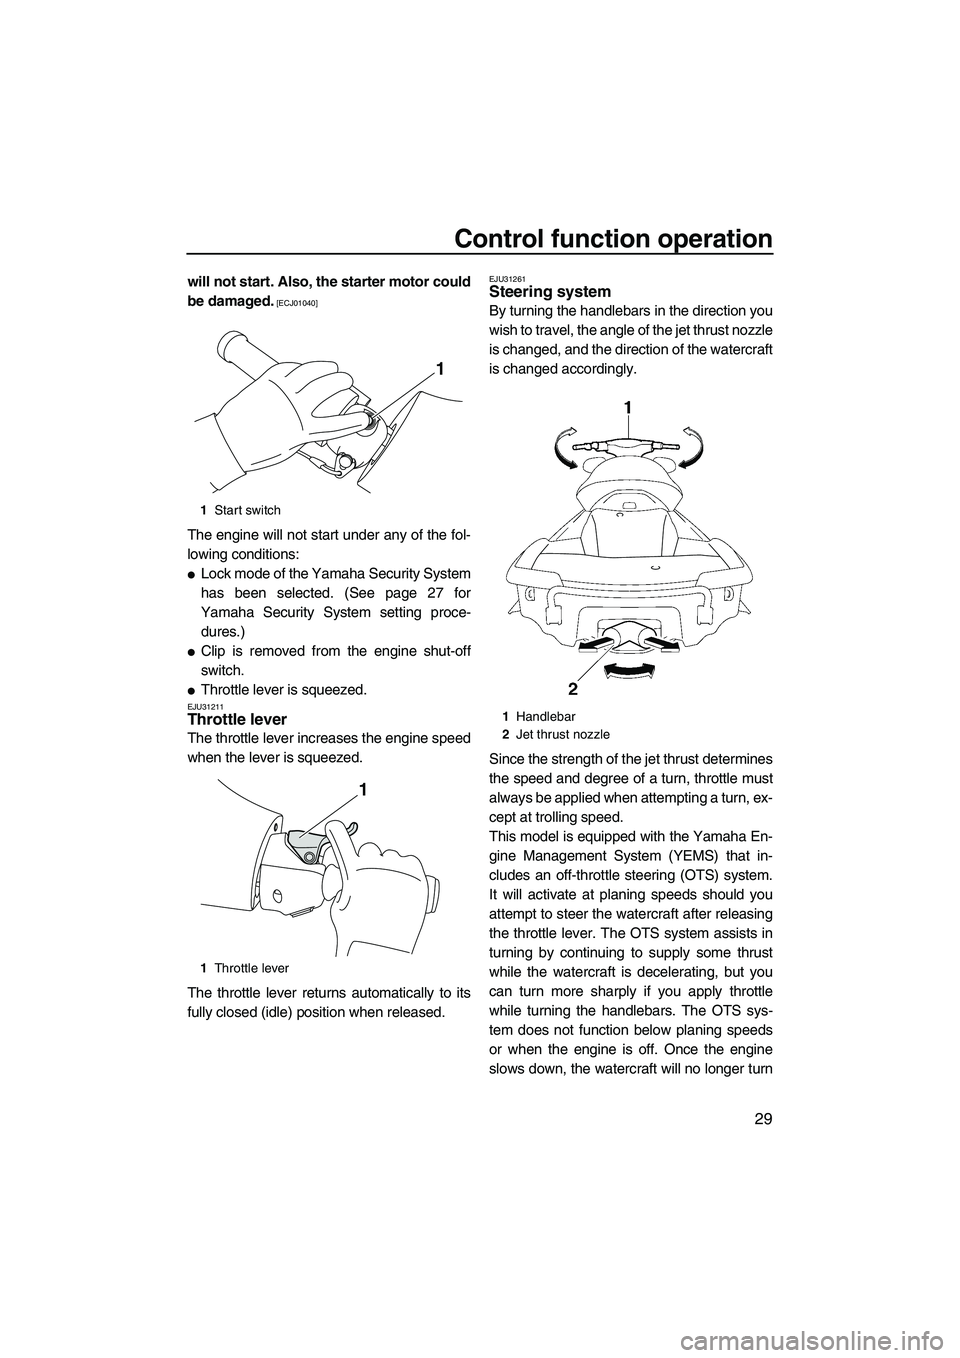 YAMAHA SVHO 2011 Owners Guide Control function operation
29
will not start. Also, the starter motor could
be damaged.
 [ECJ01040]
The engine will not start under any of the fol-
lowing conditions:
Lock mode of the Yamaha Security